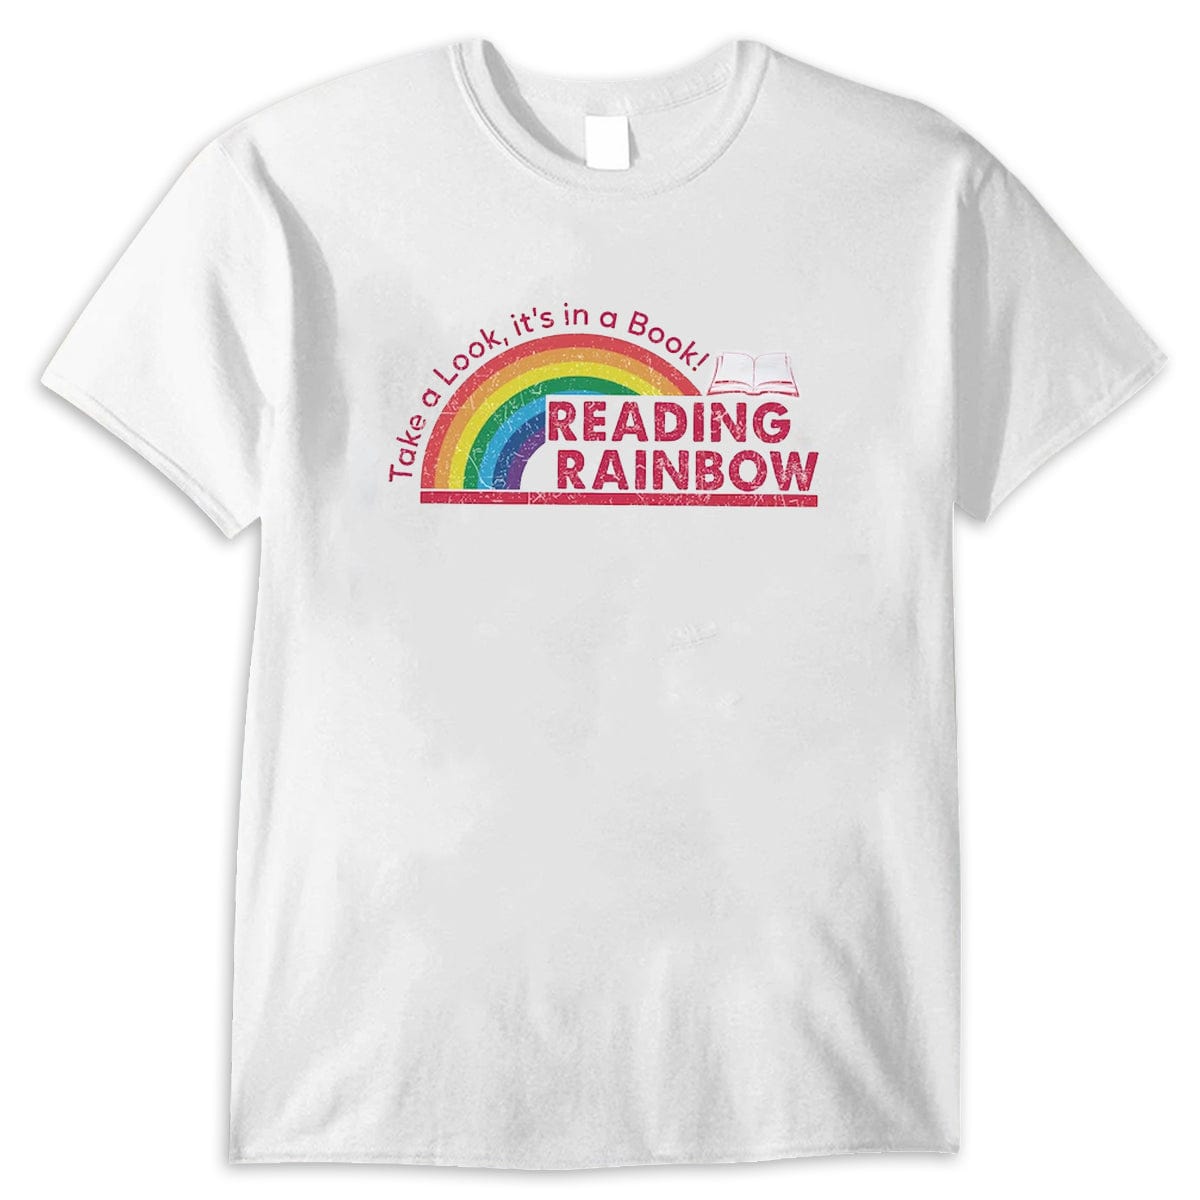 Reading Rainbow Shirt, Take A Look, It's In A Book Shirts